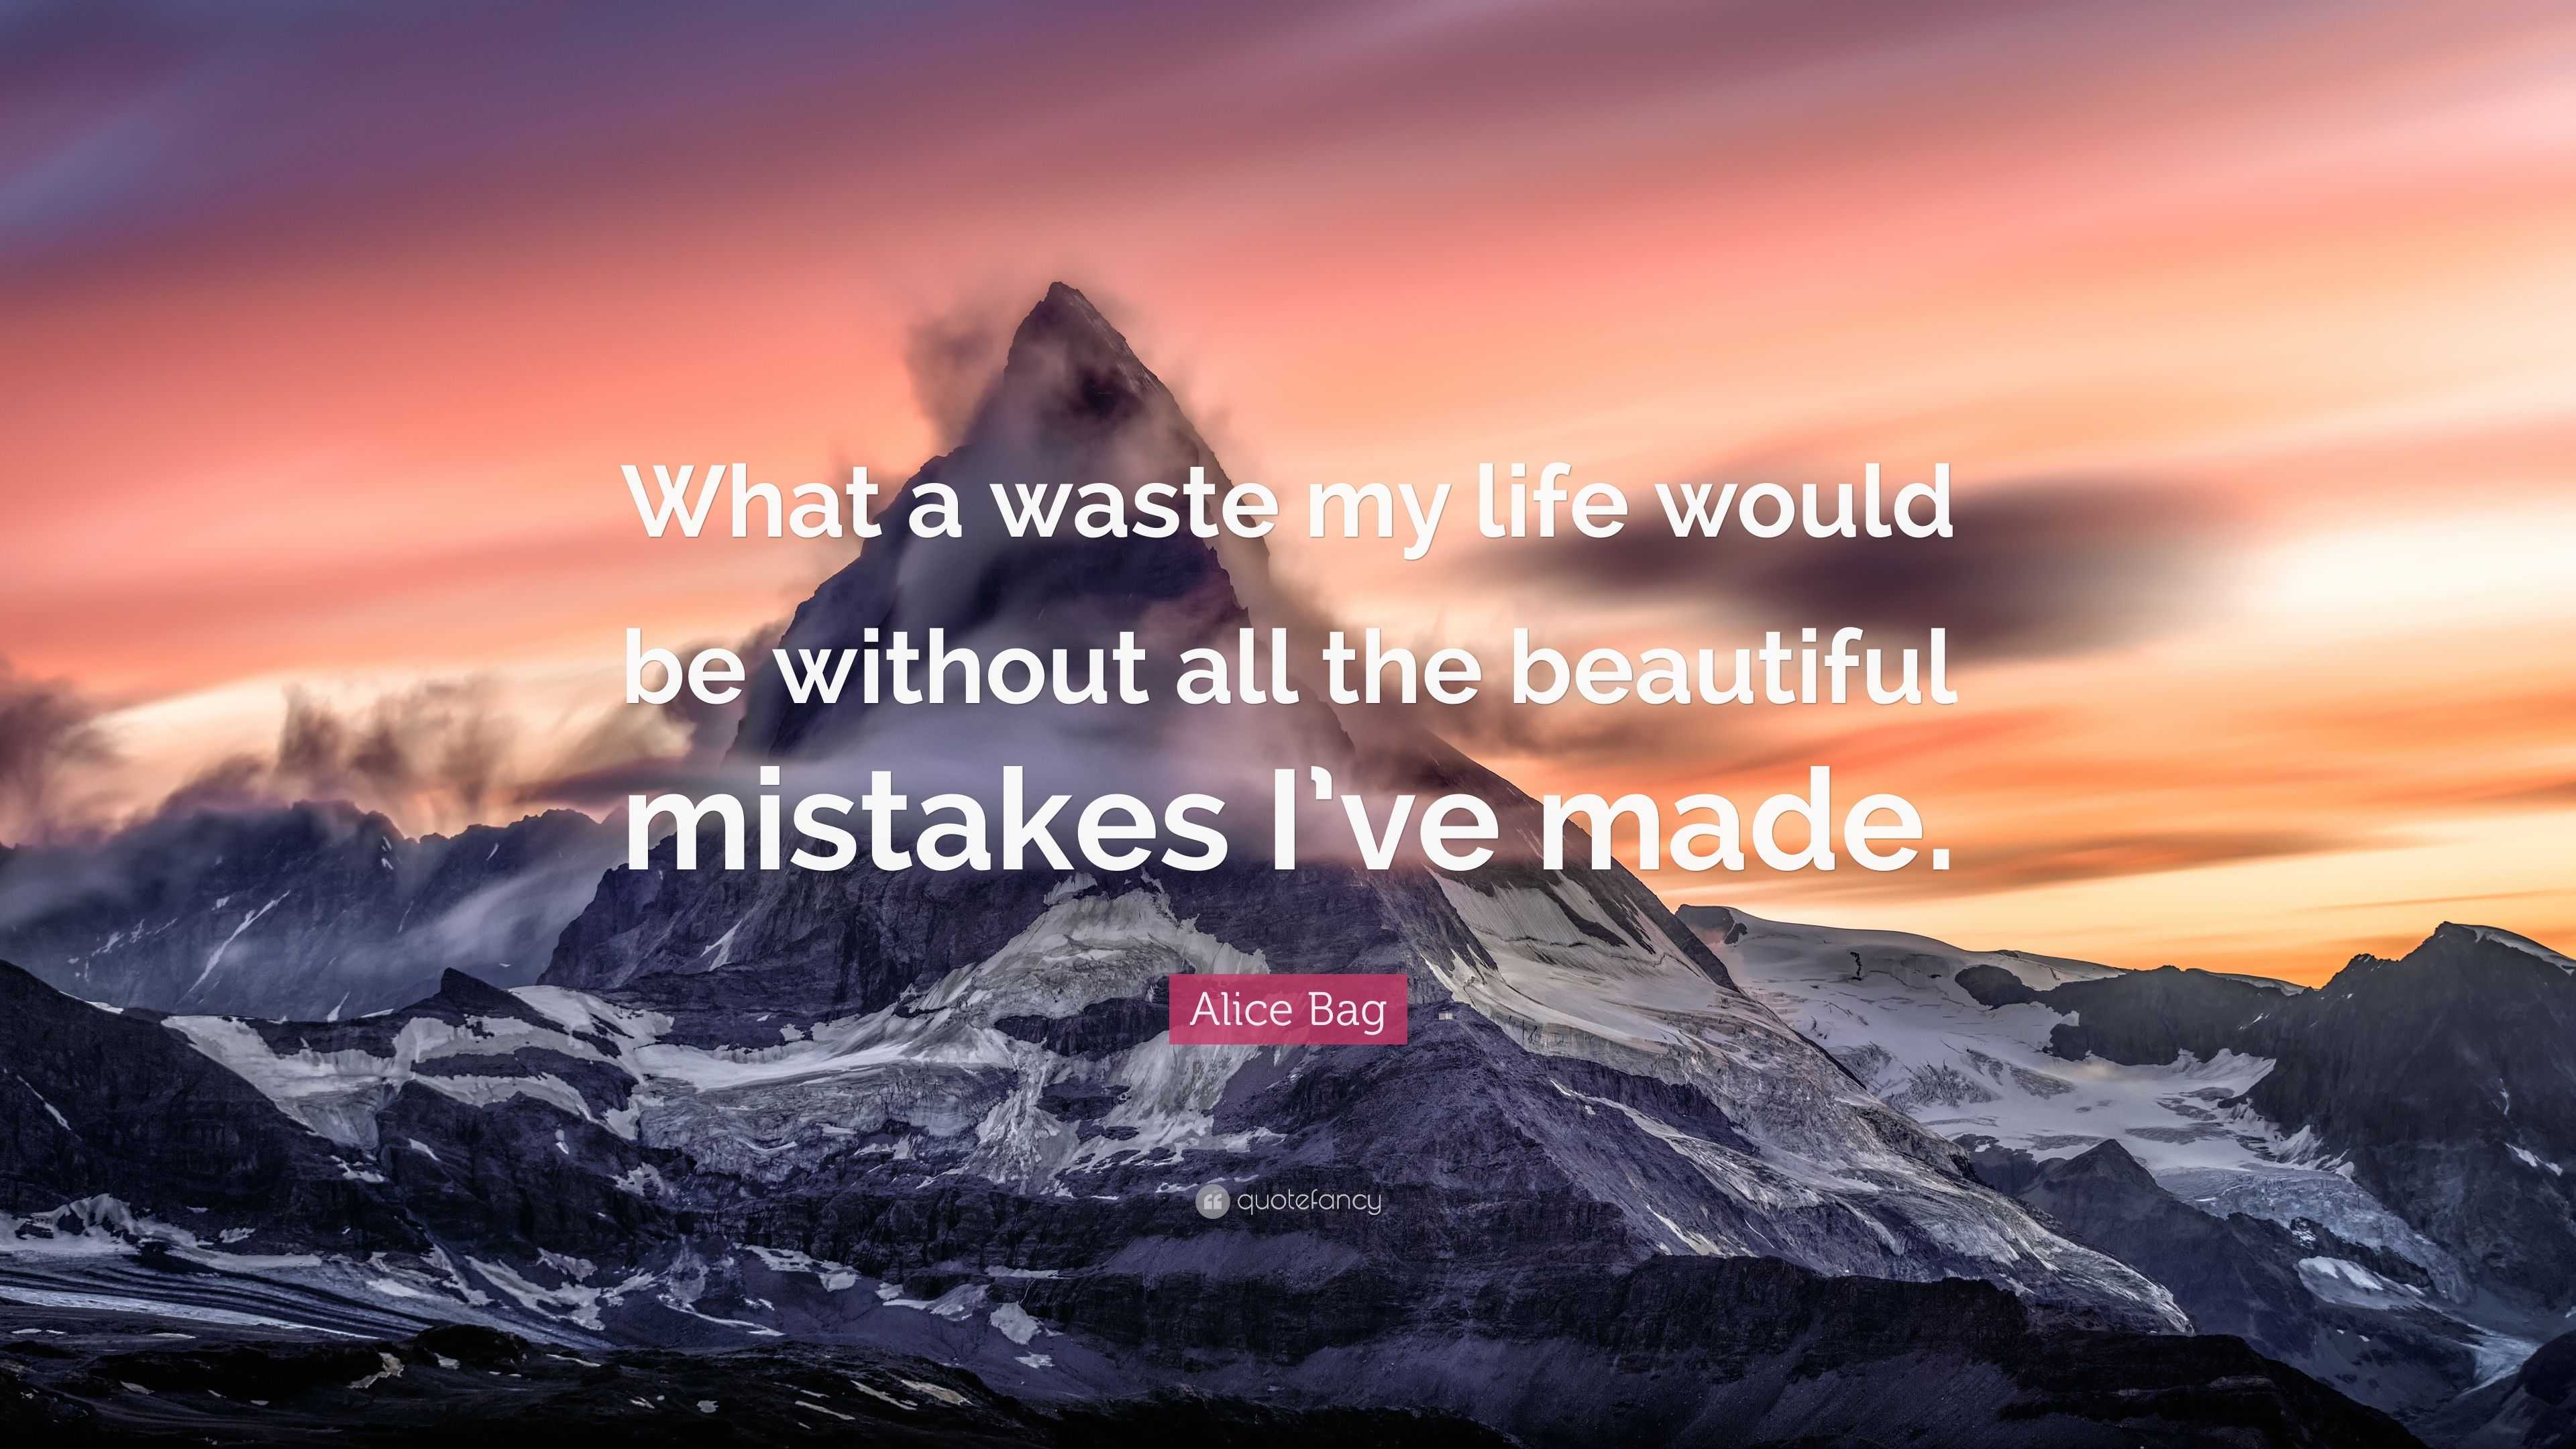 The Beautiful Mistakes